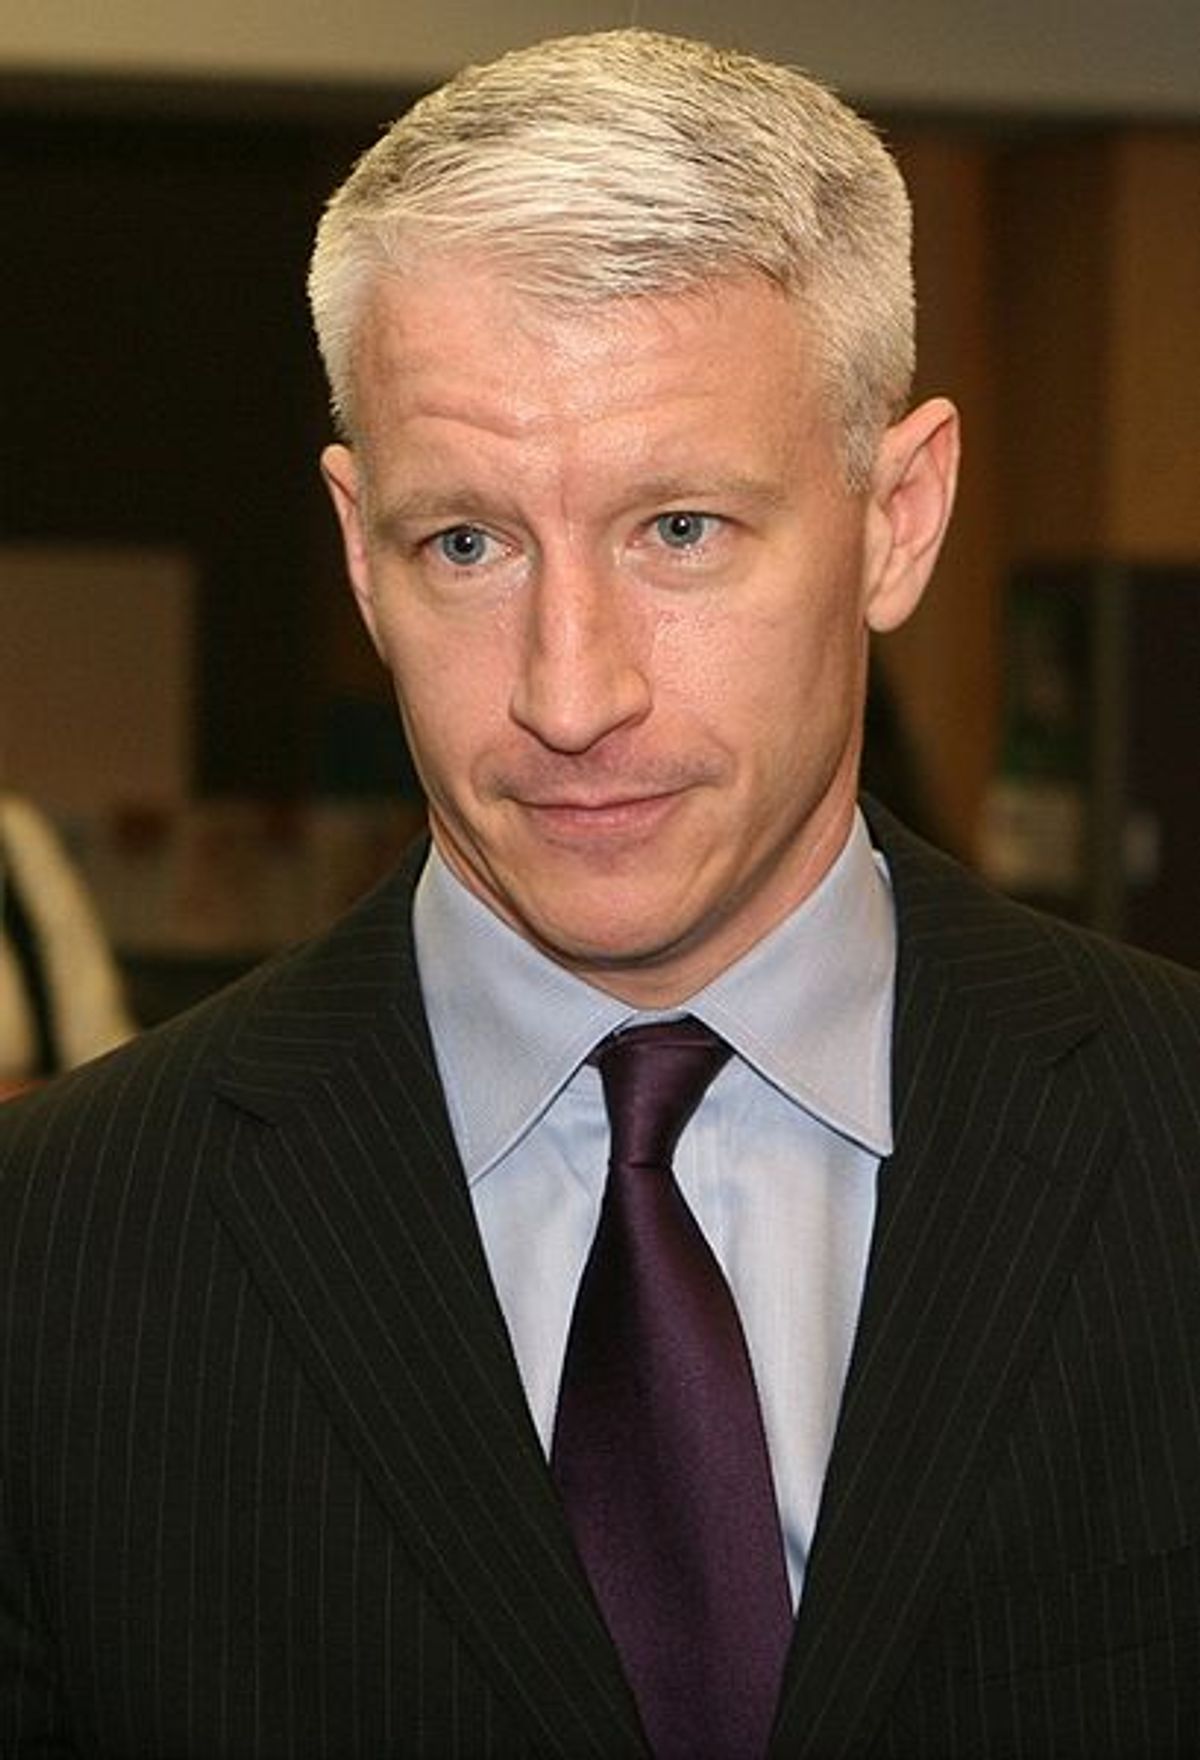 Anderson Cooper will narrate an upcoming revival of "How to Succeed" on Broadway       